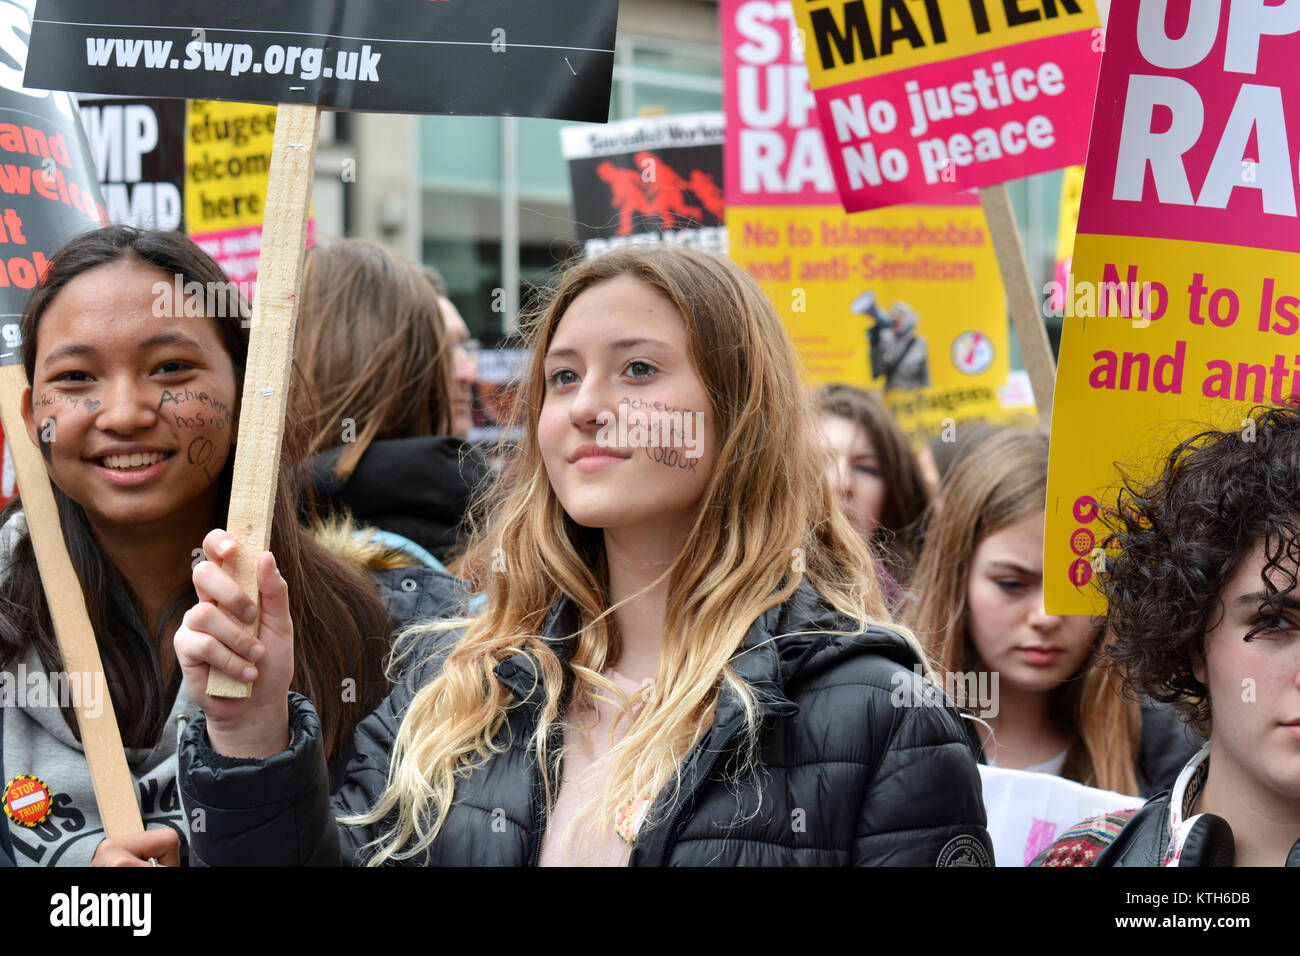 UN International Anti-Racism Day: Anti-racism protesters carry a message written on their faces 'Achievement has no colour' in London, UK. Stock Photo